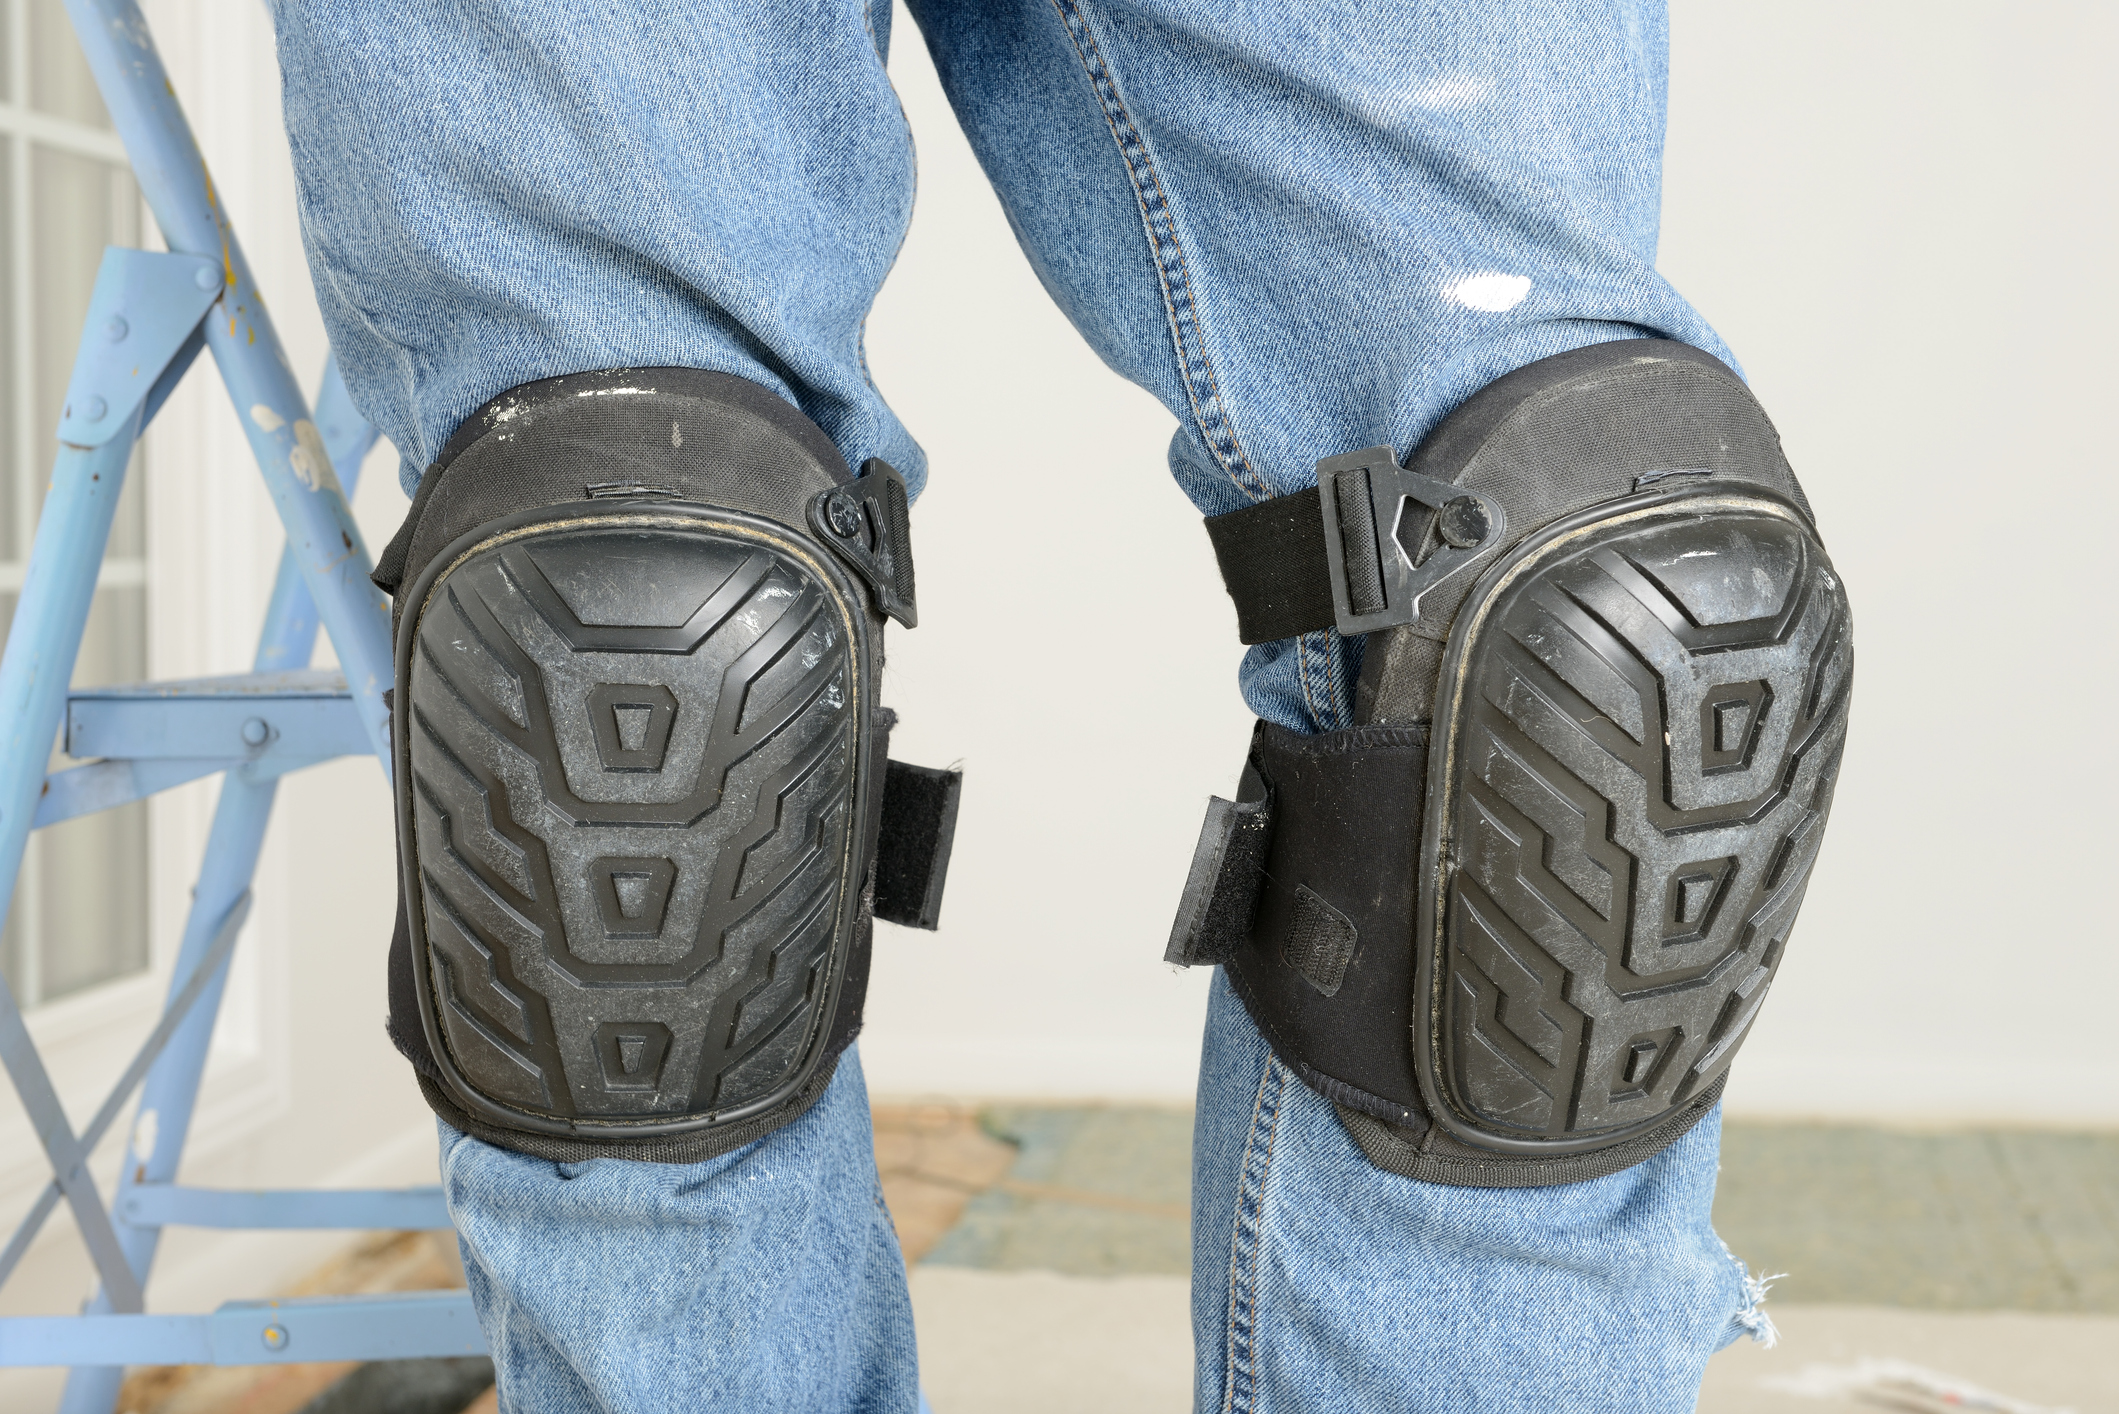 Rolling Work Knee Pads for Construction Carpenters Drywall Jobs Job Site Safety 